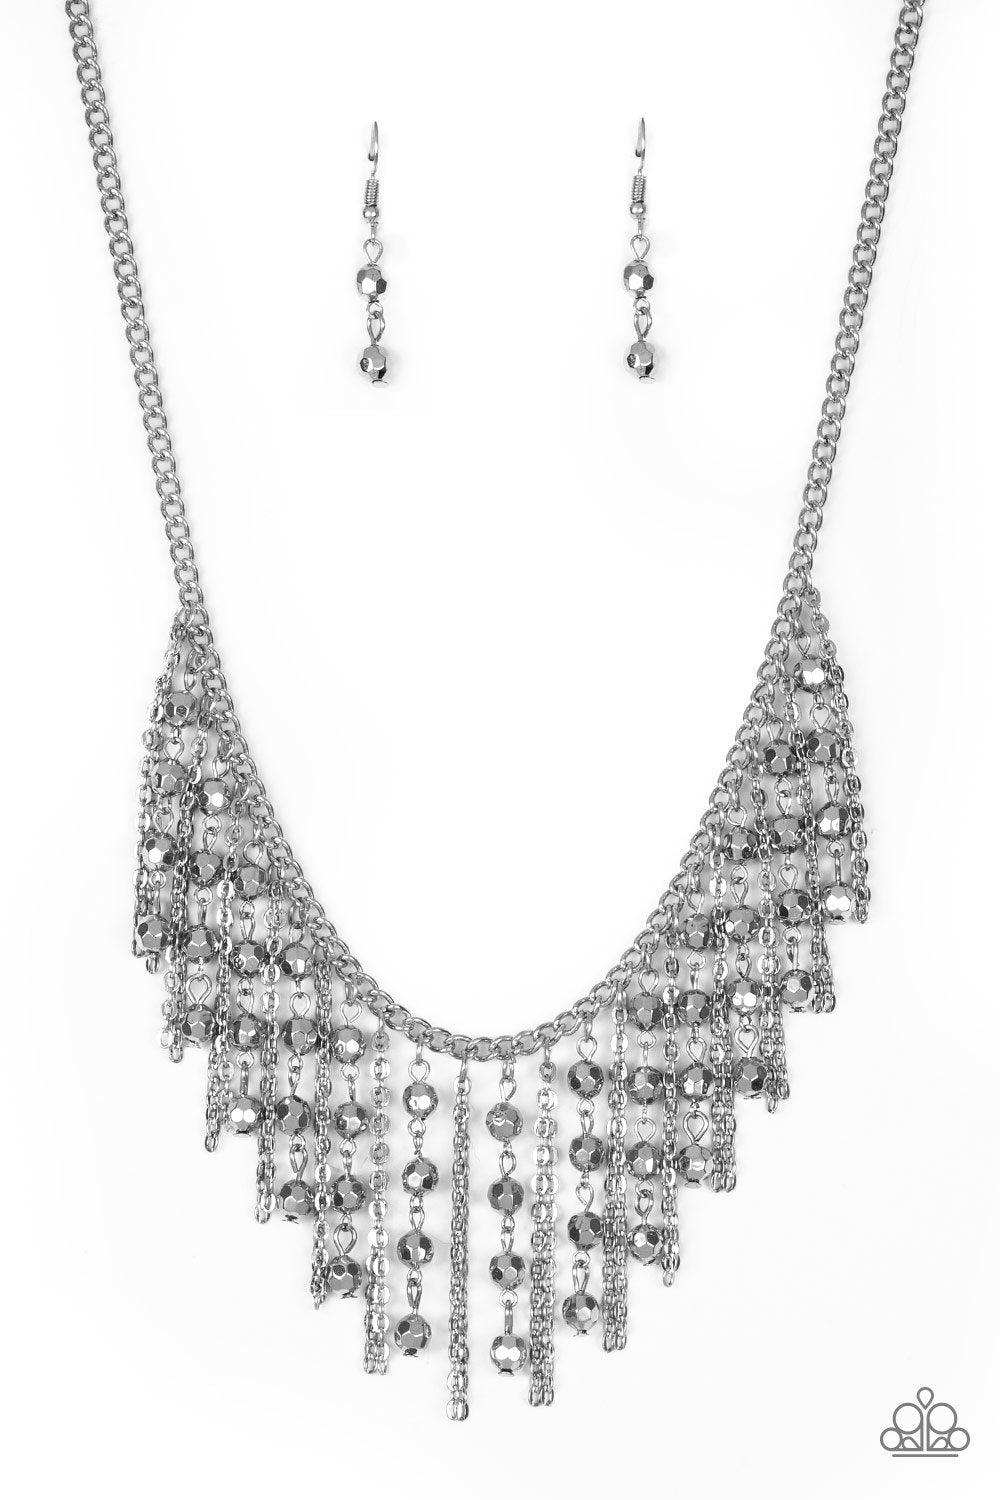 Rebel Remix Silver Fringe Necklace - Paparazzi Accessories- lightbox - CarasShop.com - $5 Jewelry by Cara Jewels